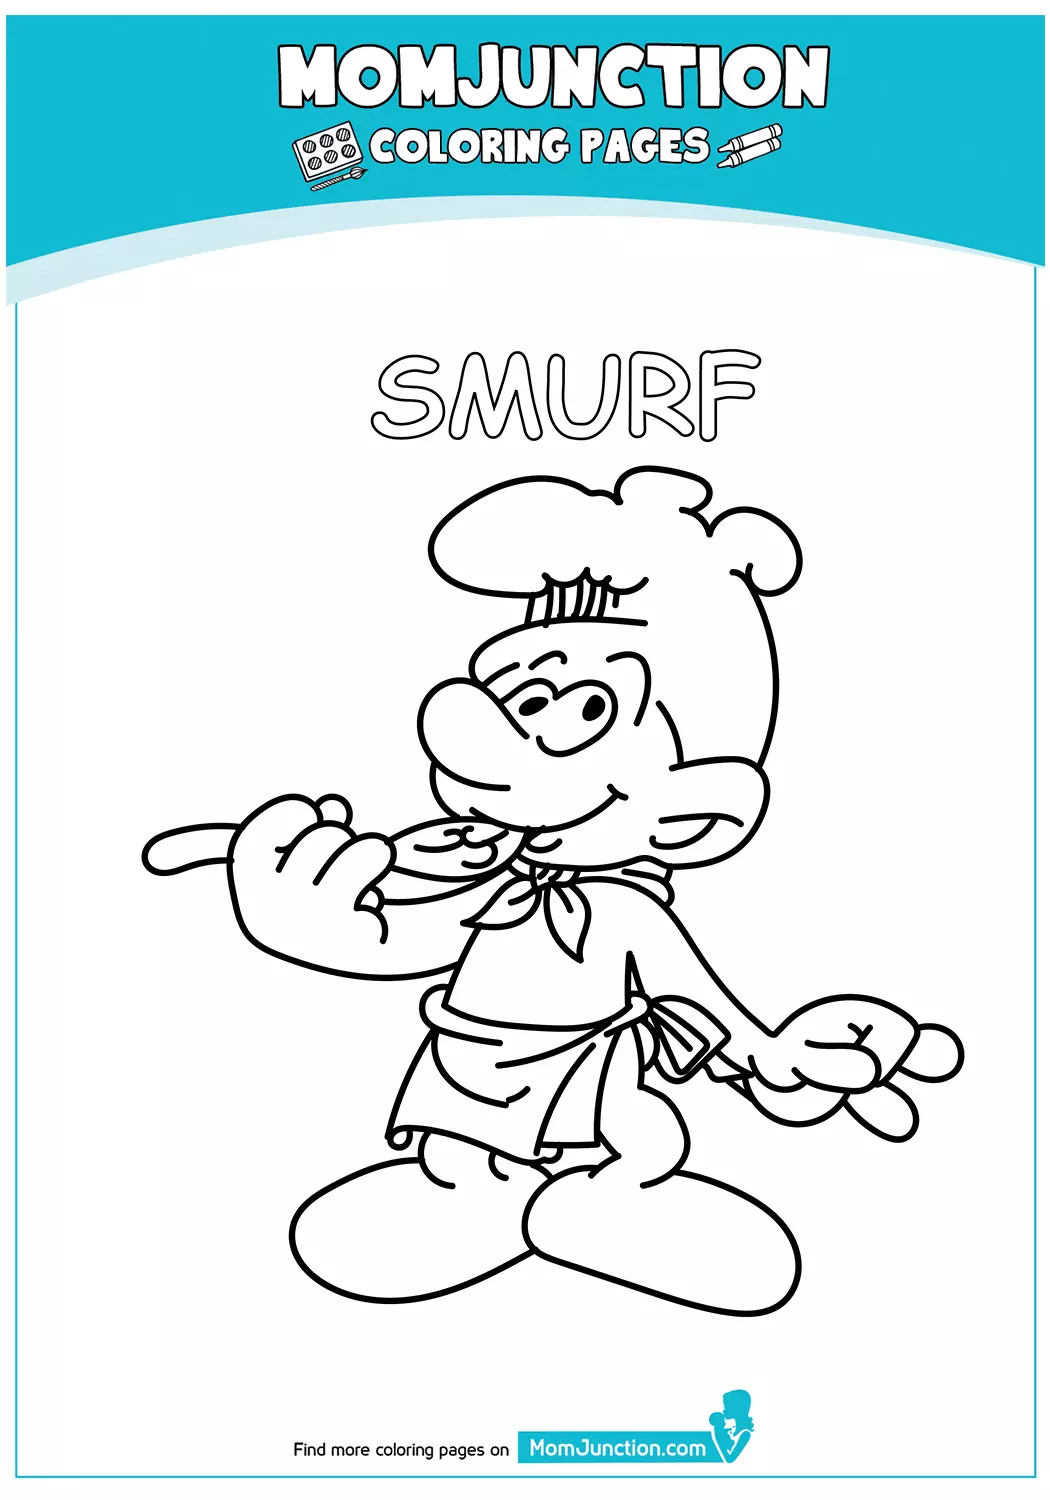 A-Funny-Smurf-Coloring-Eat-17-9